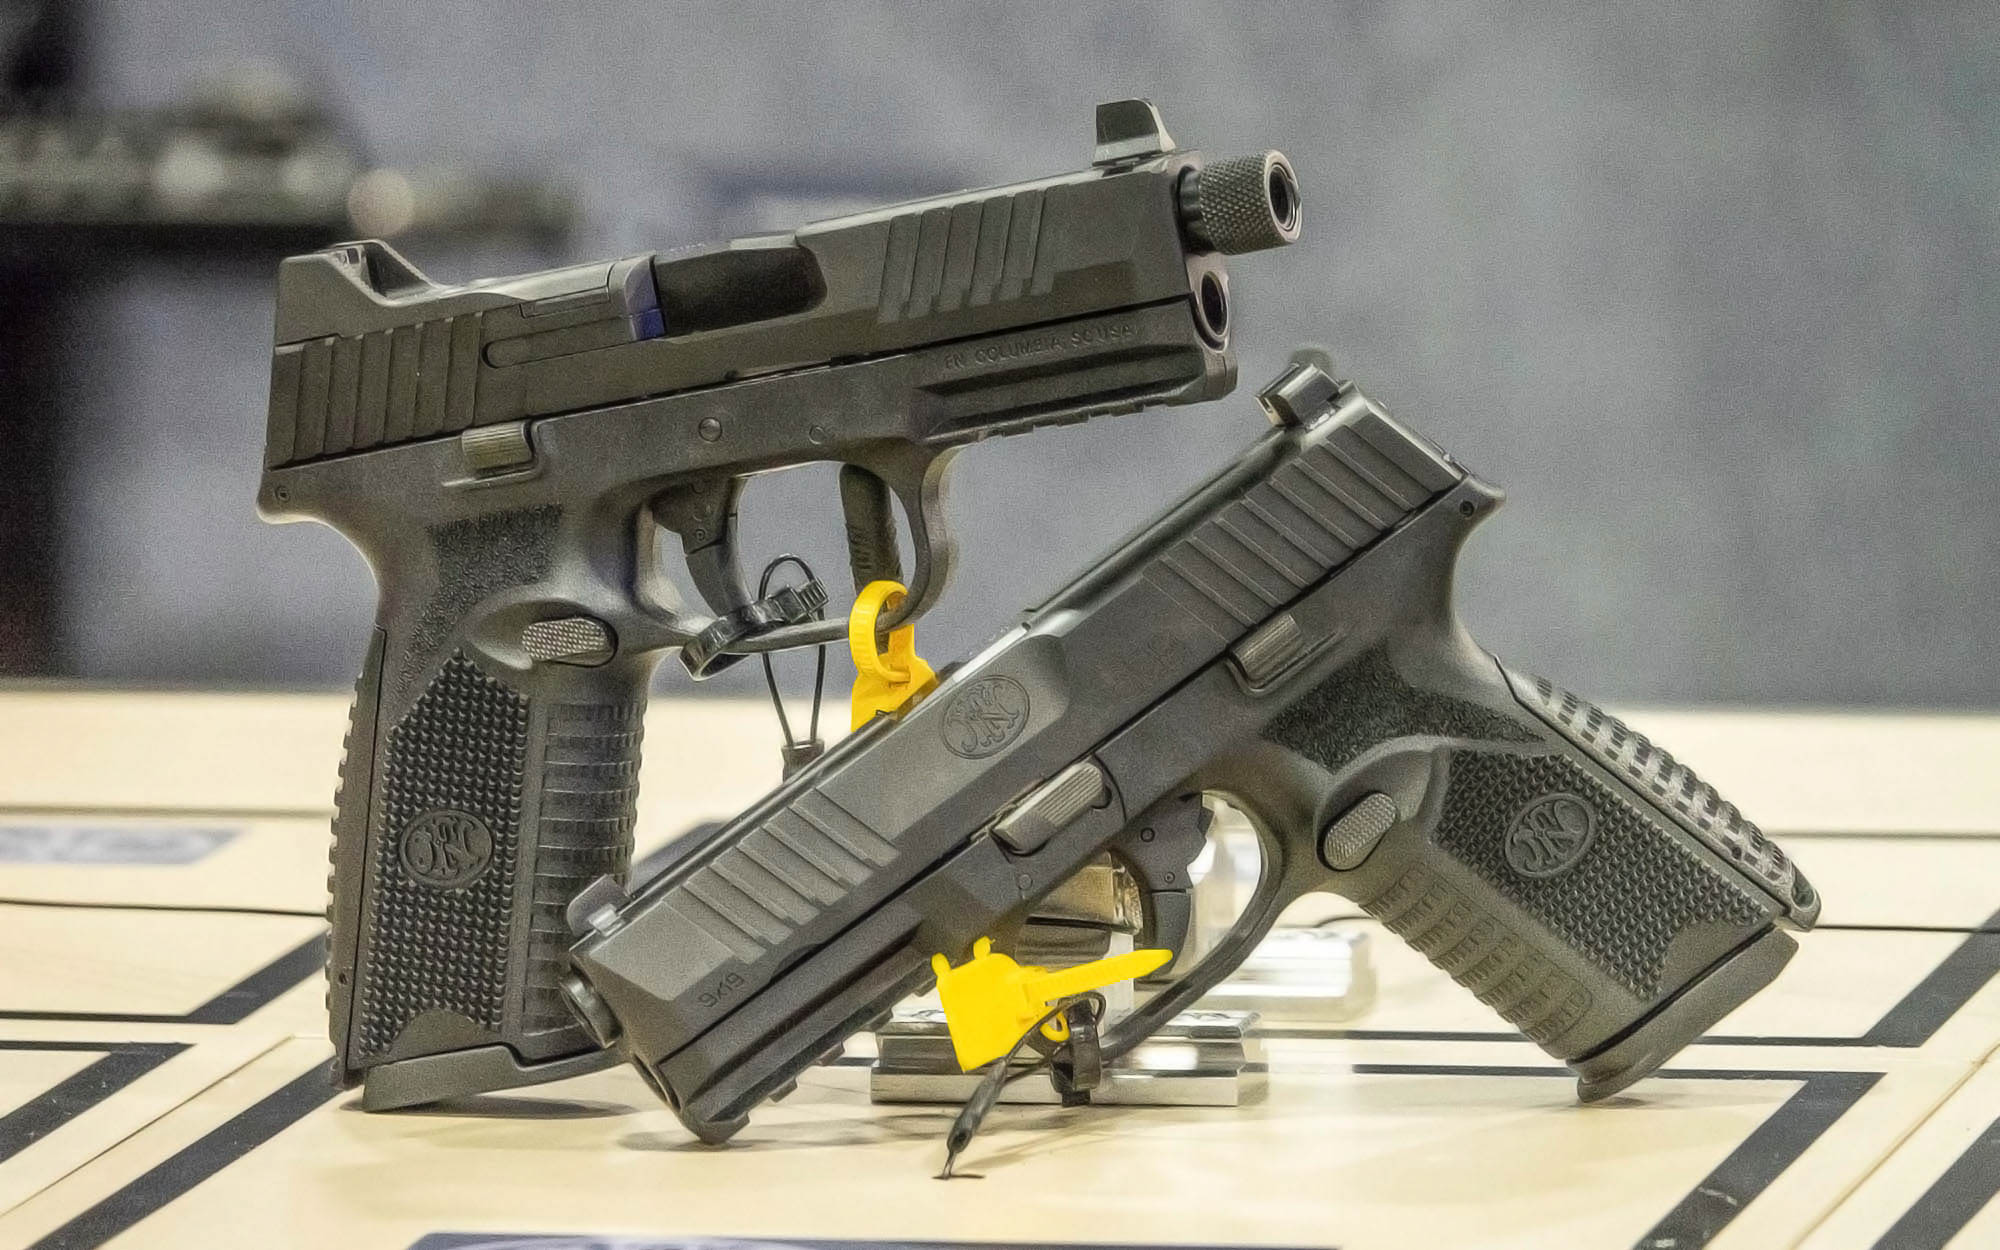 FN America FN 509 Tactical Black and FN 509 Midsize pistols.